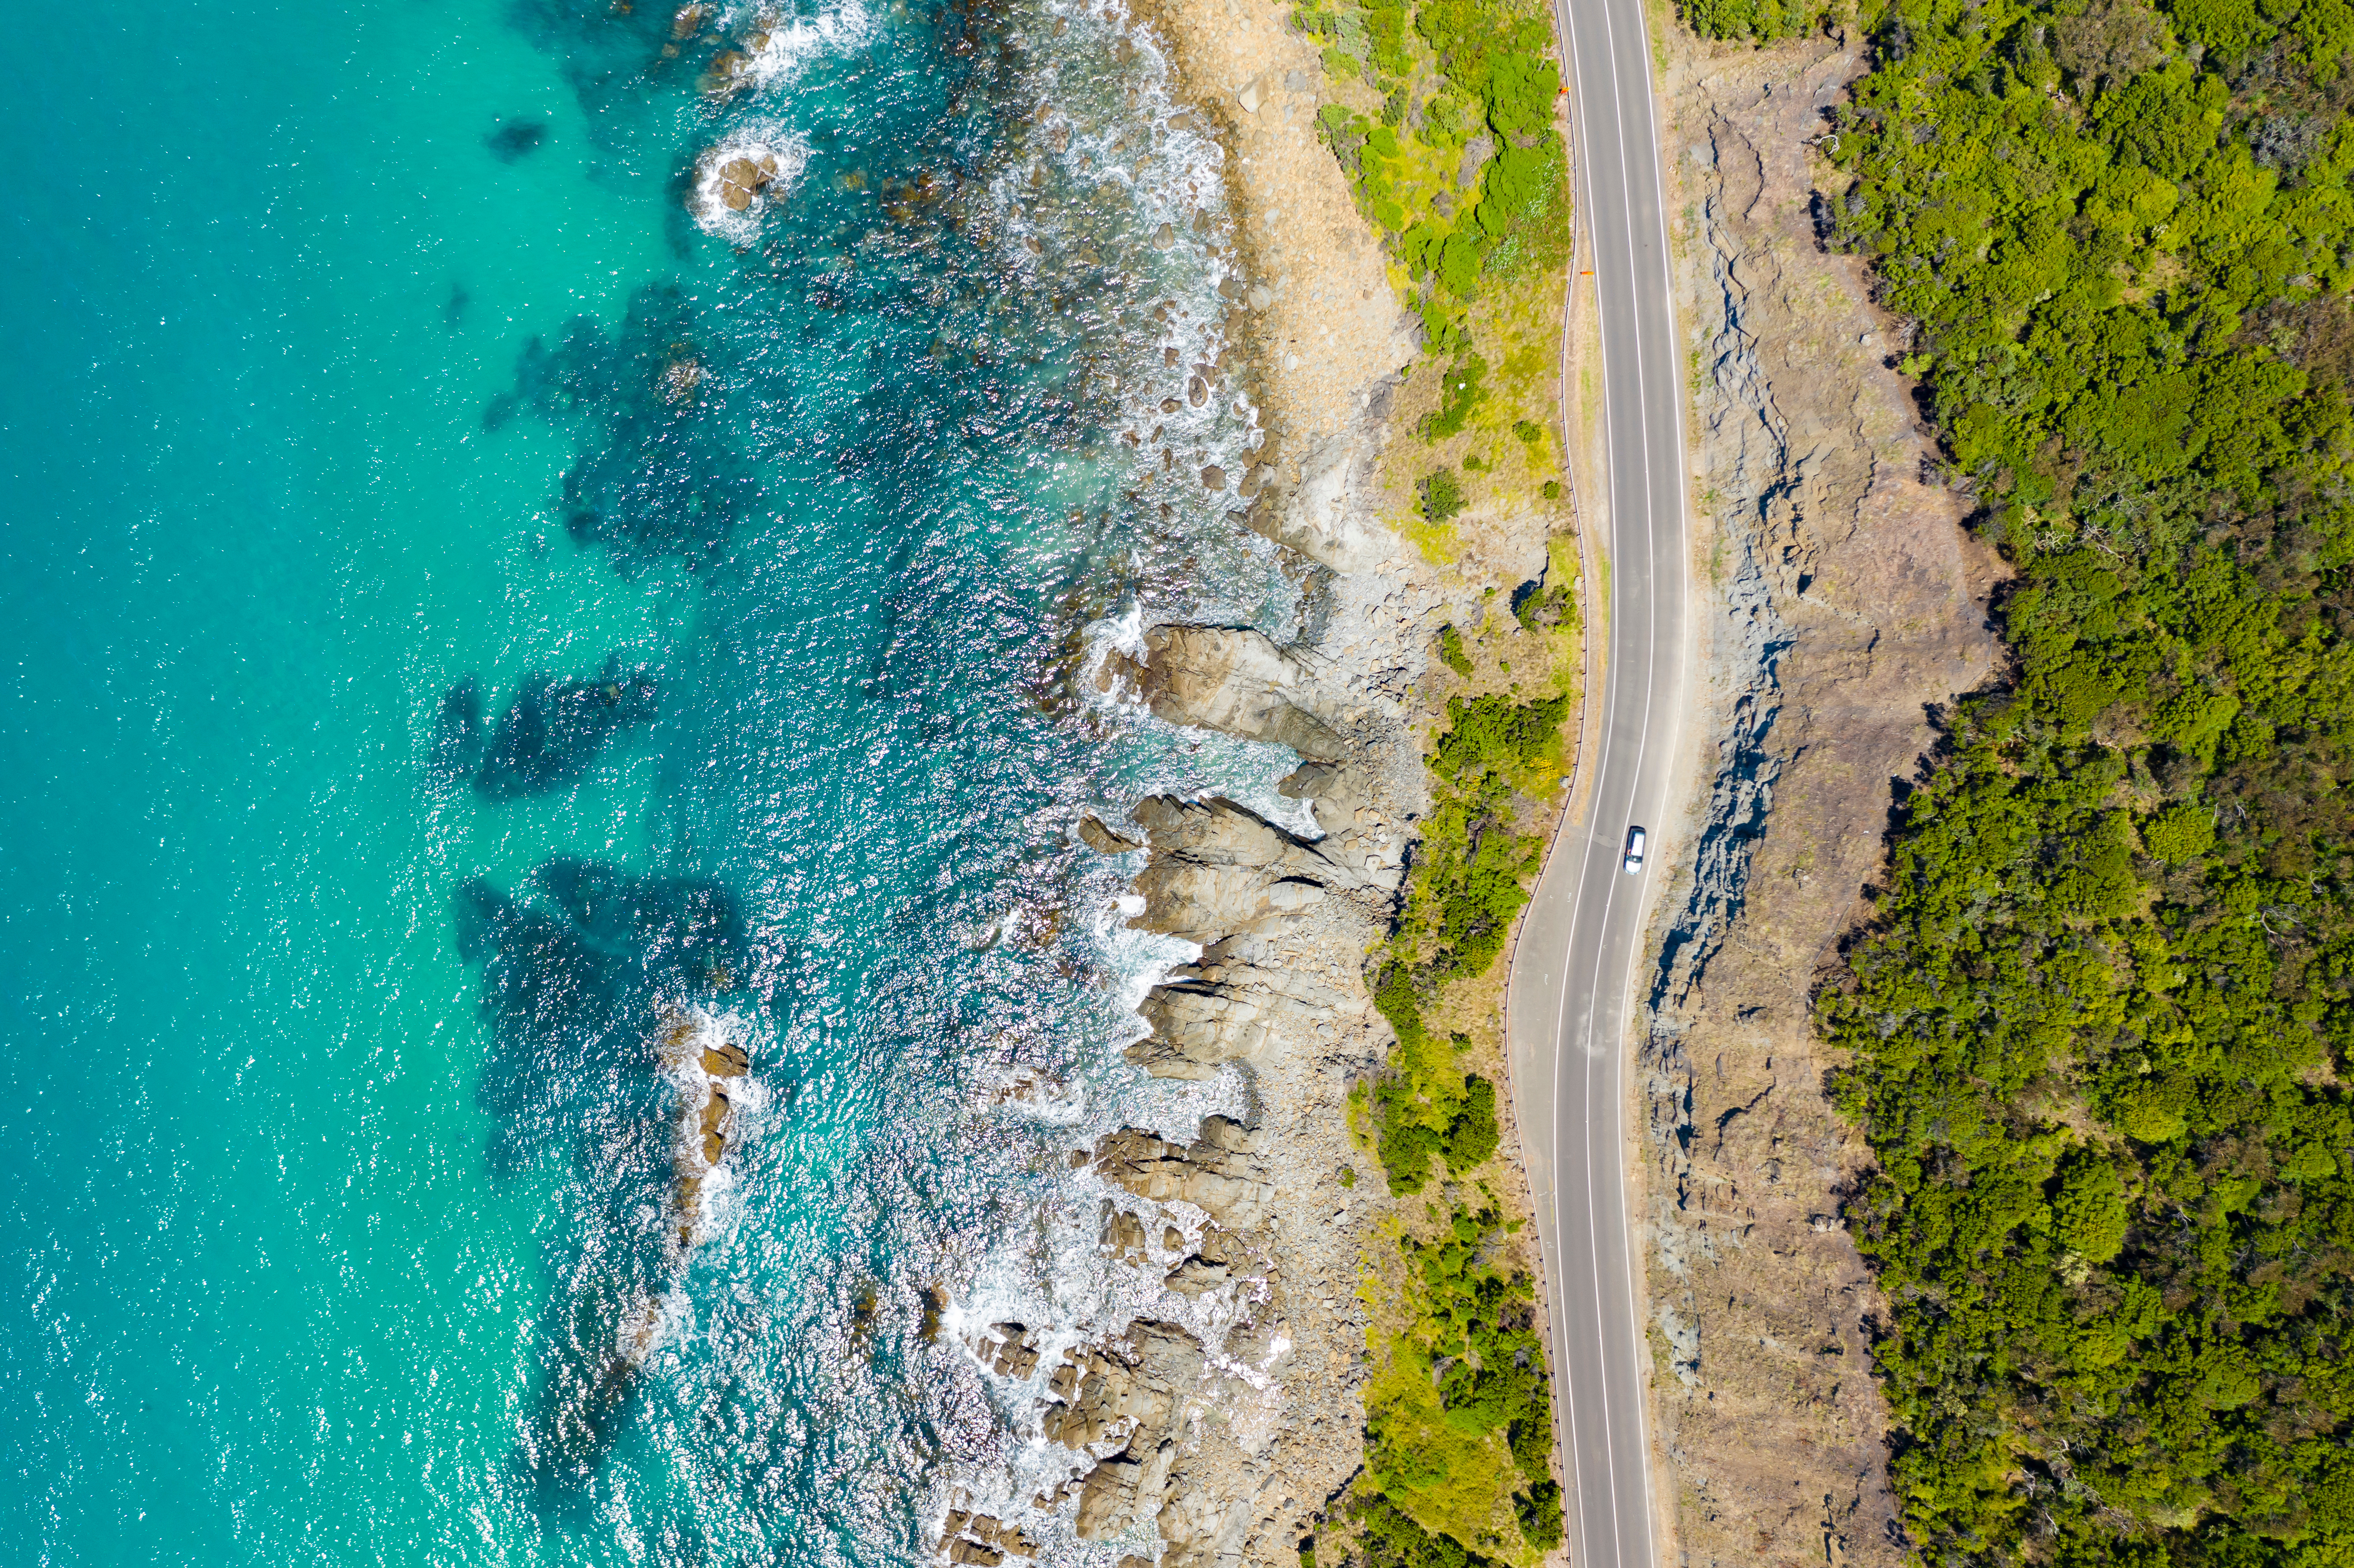 an image of a road next to the ocean in australia